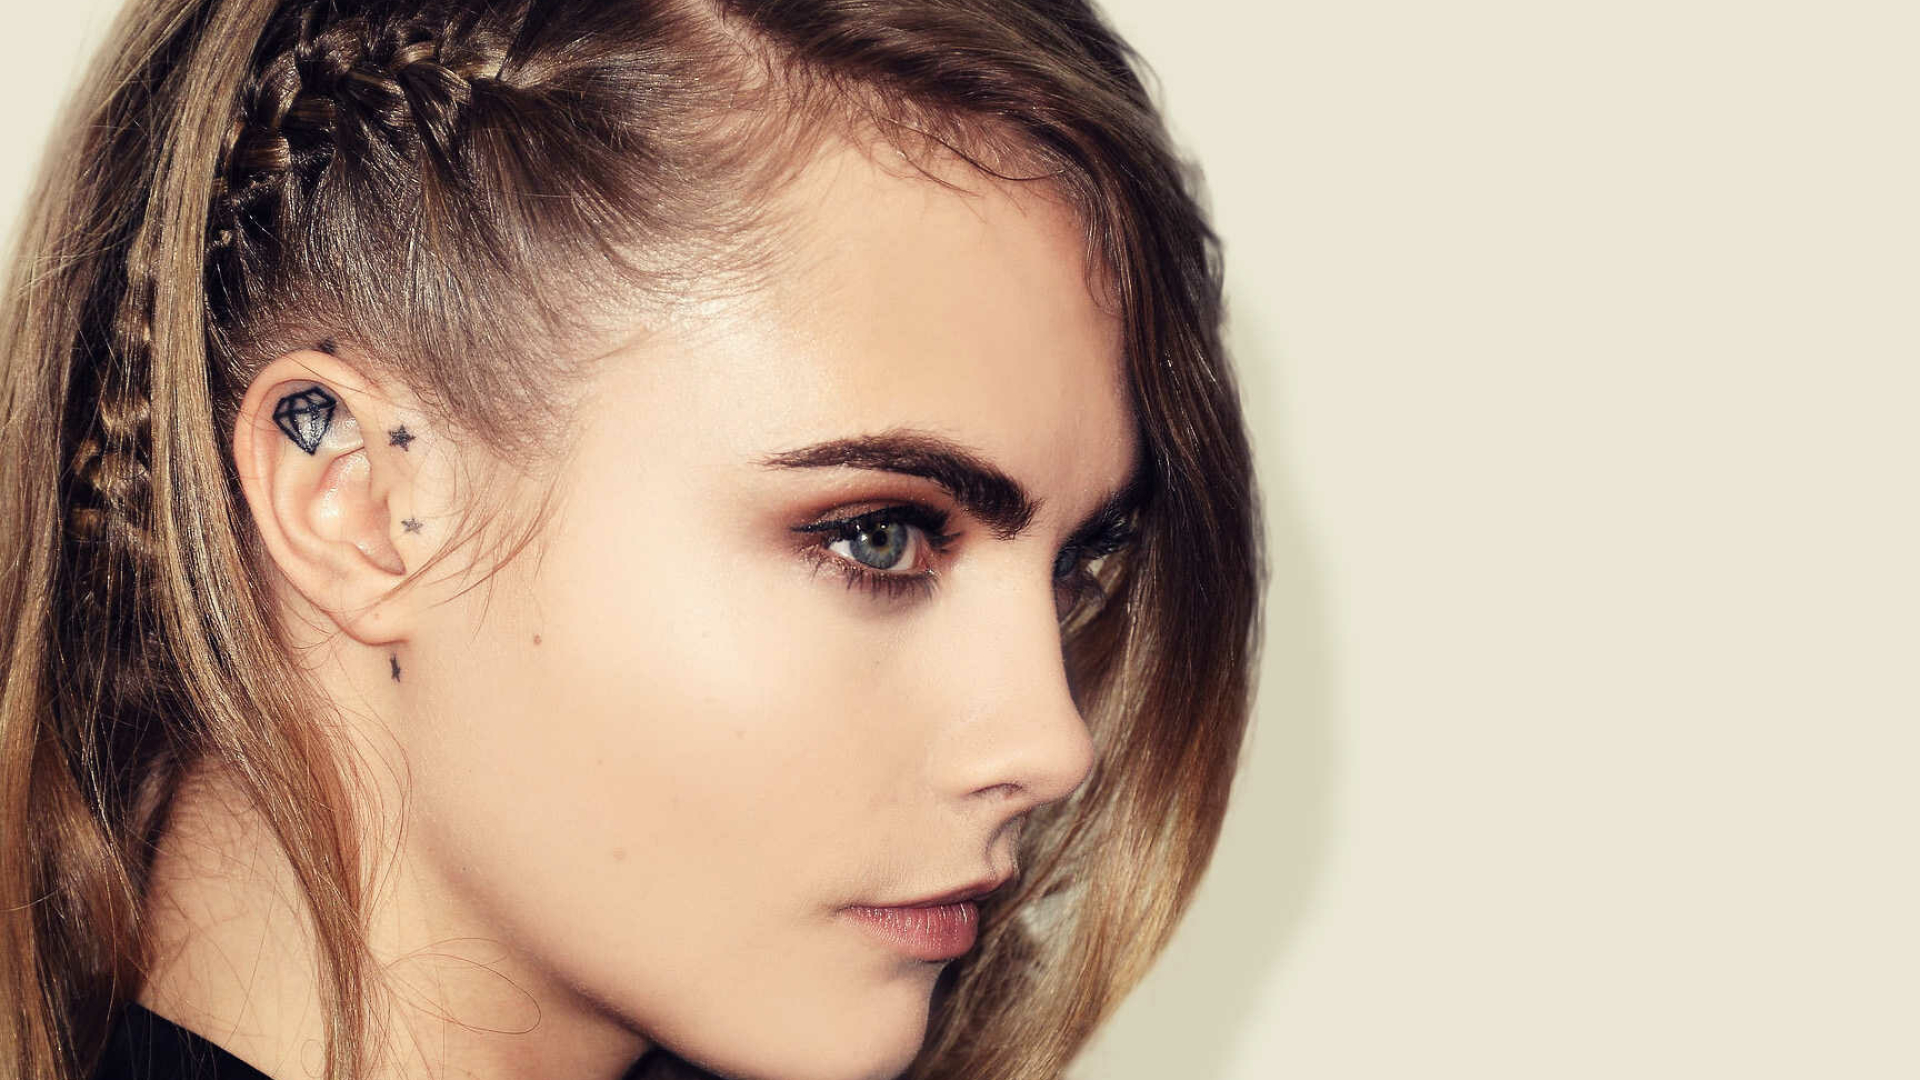 Cara Delevingne: One of the most iconic models of our time. 1920x1080 Full HD Background.